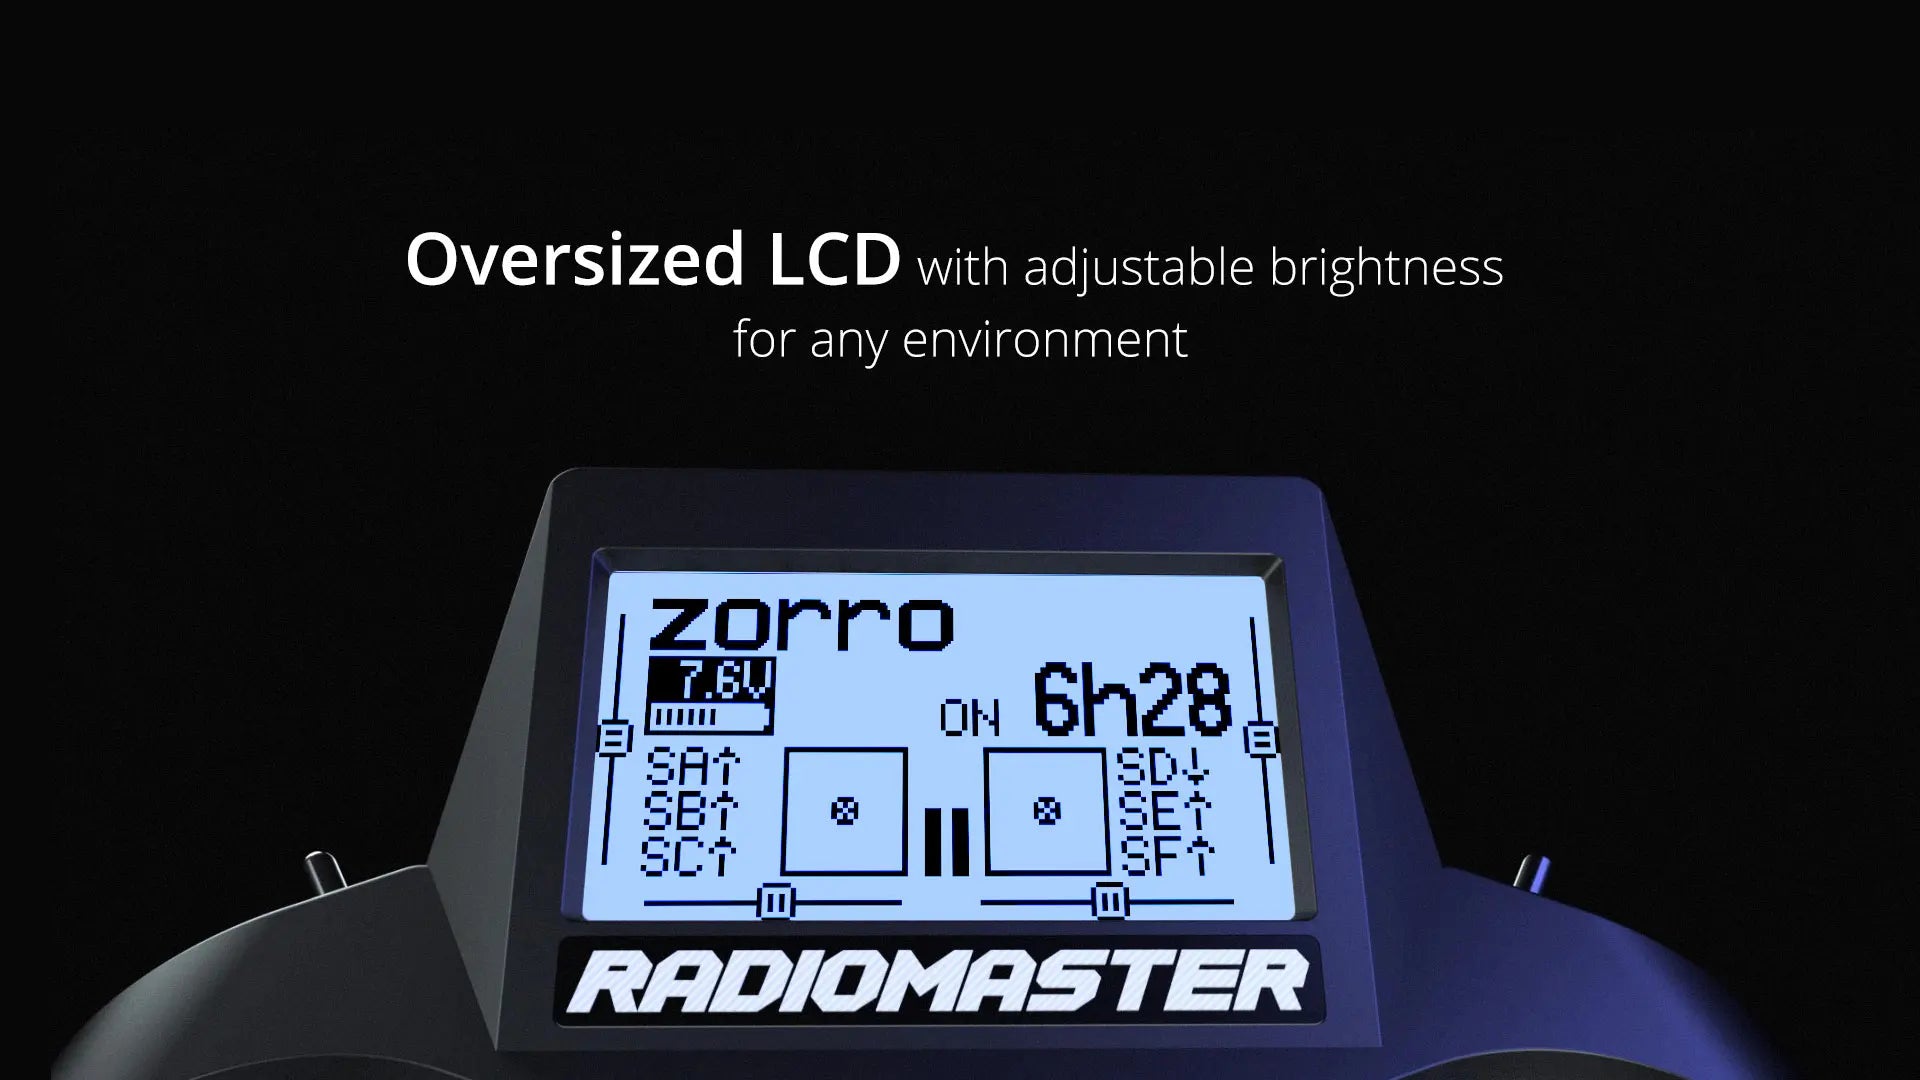 Oversized LCD with adjustable brightness for any environment zorro 7.6V 6h